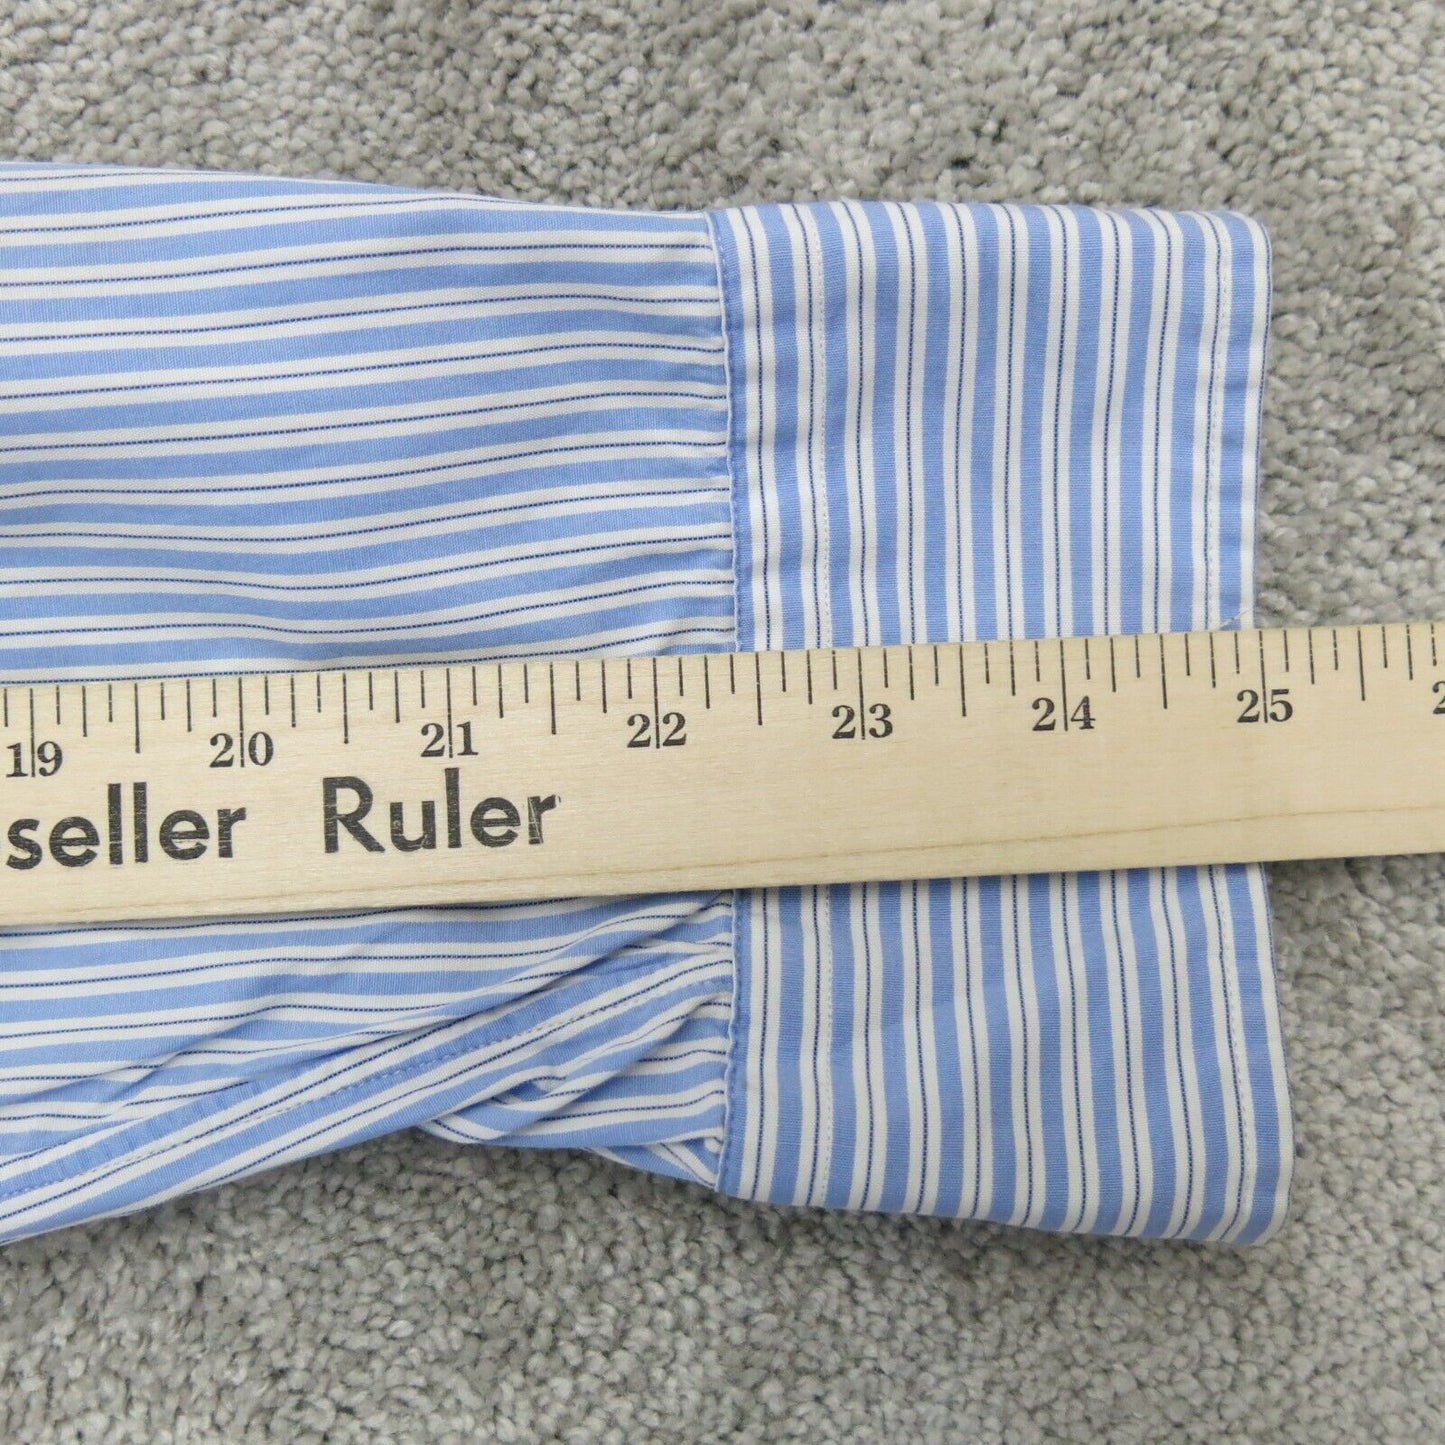 Polo By Ralph Lauren Mens Button up Curham Classic Fit Striped Blue/White 16.5